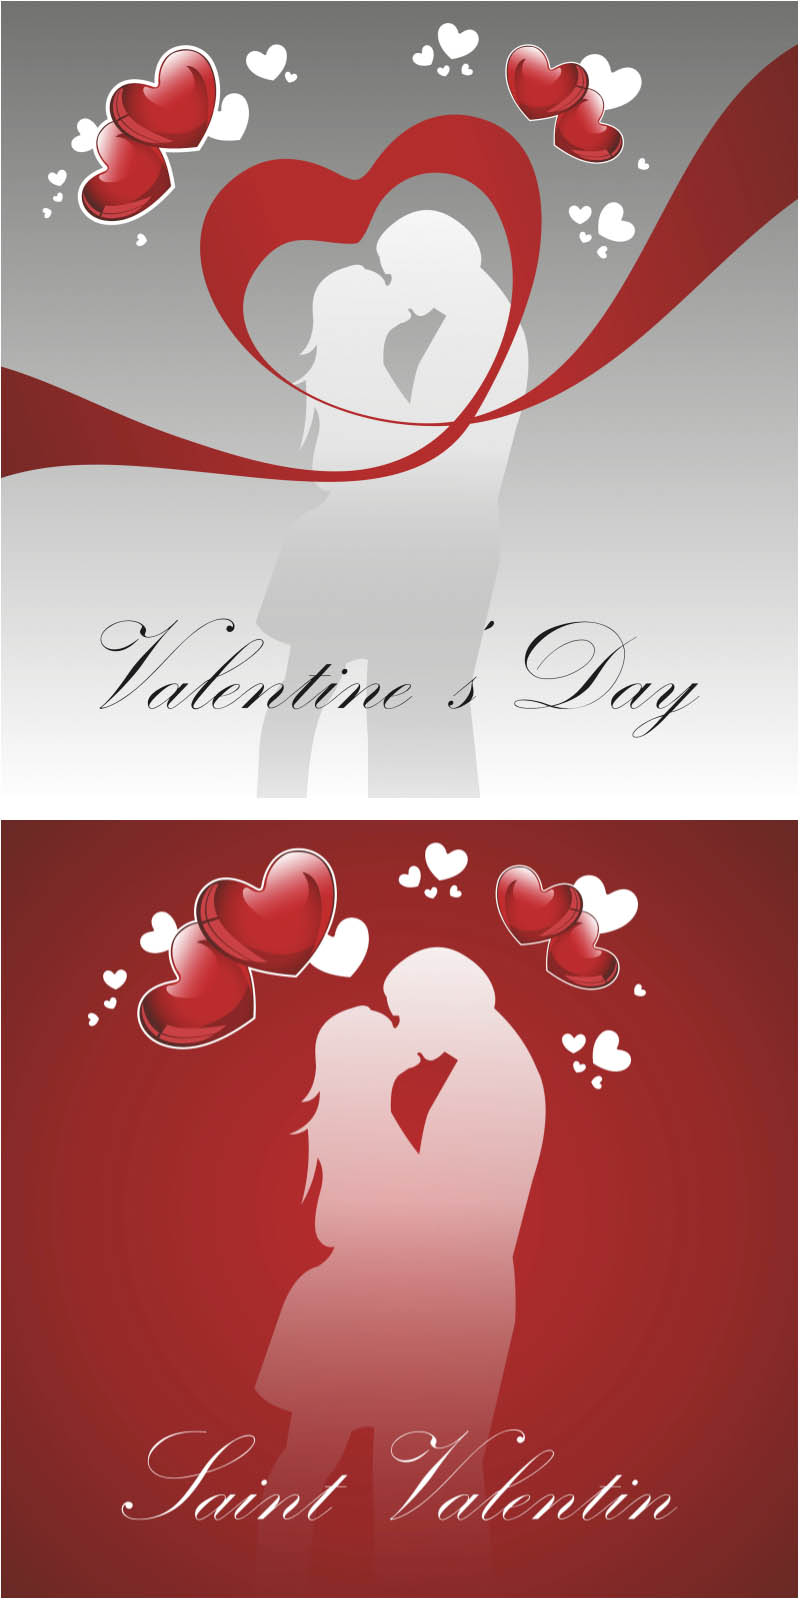 Valentine’s Day with kissing couple vector